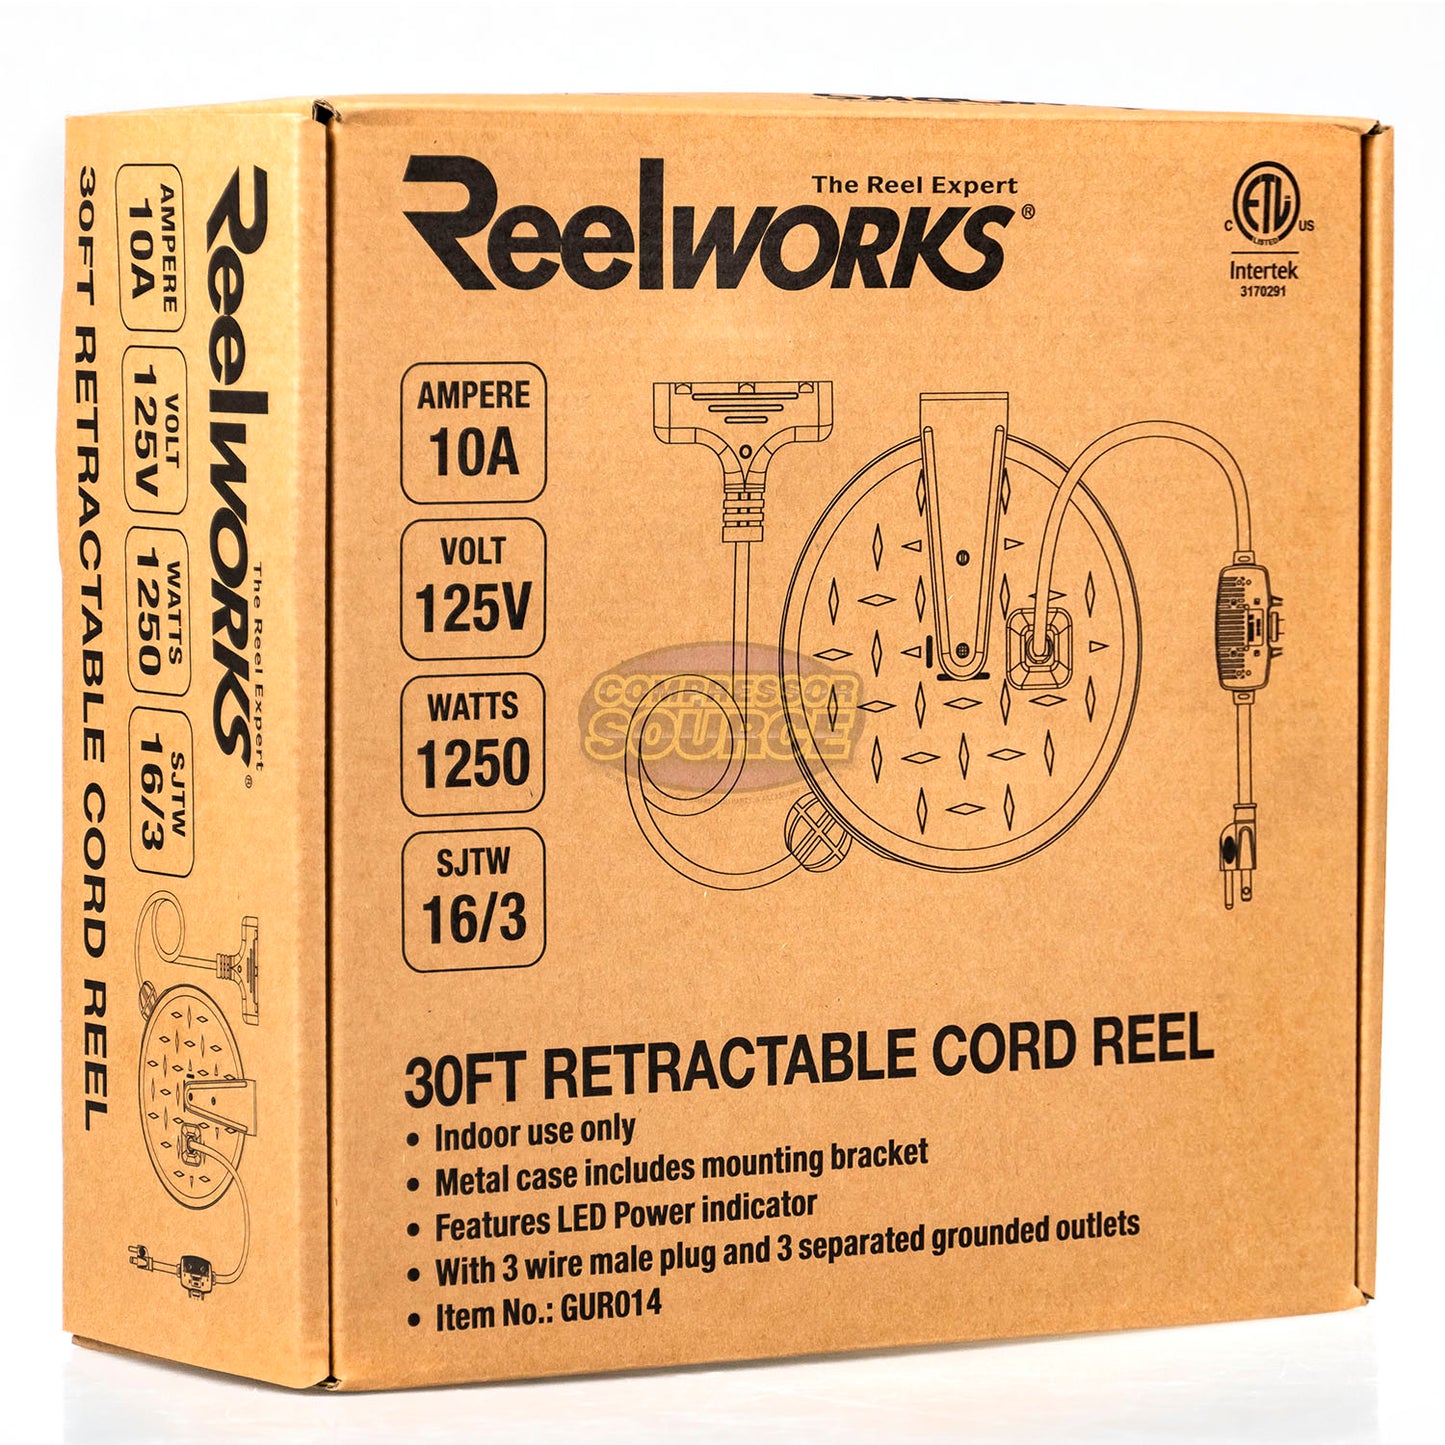 Reelworks 30 Ft Retractable Extension Cord Reel 3 Outlets 16/3 SJTW Cord Metal